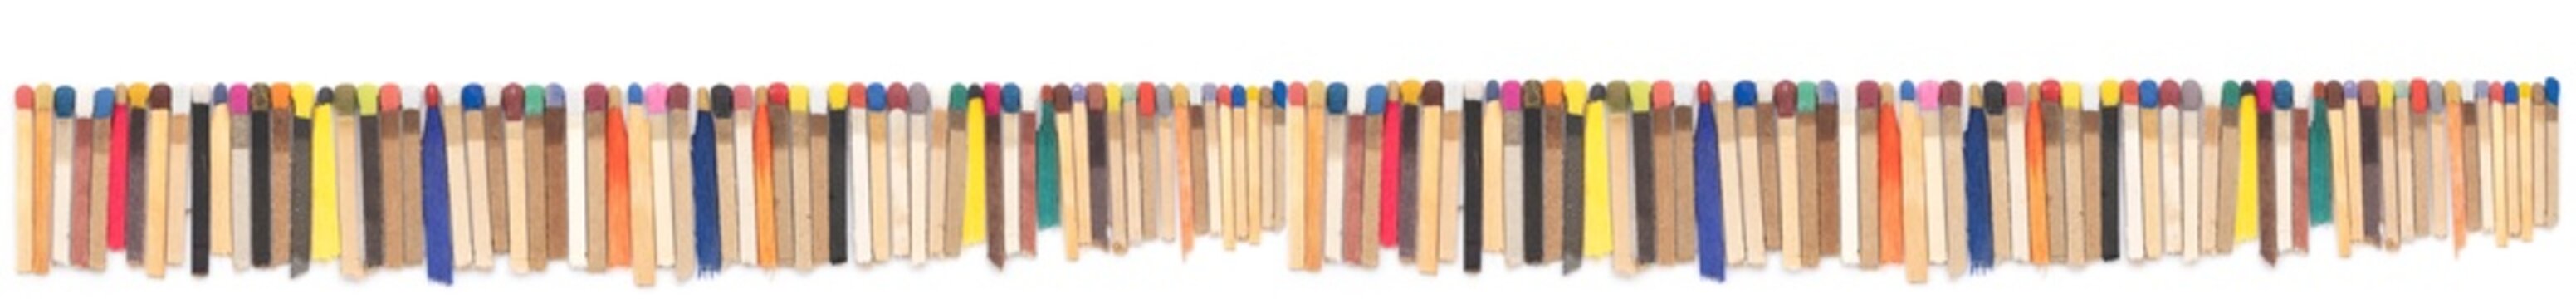 multicolored matchsticks on white paper